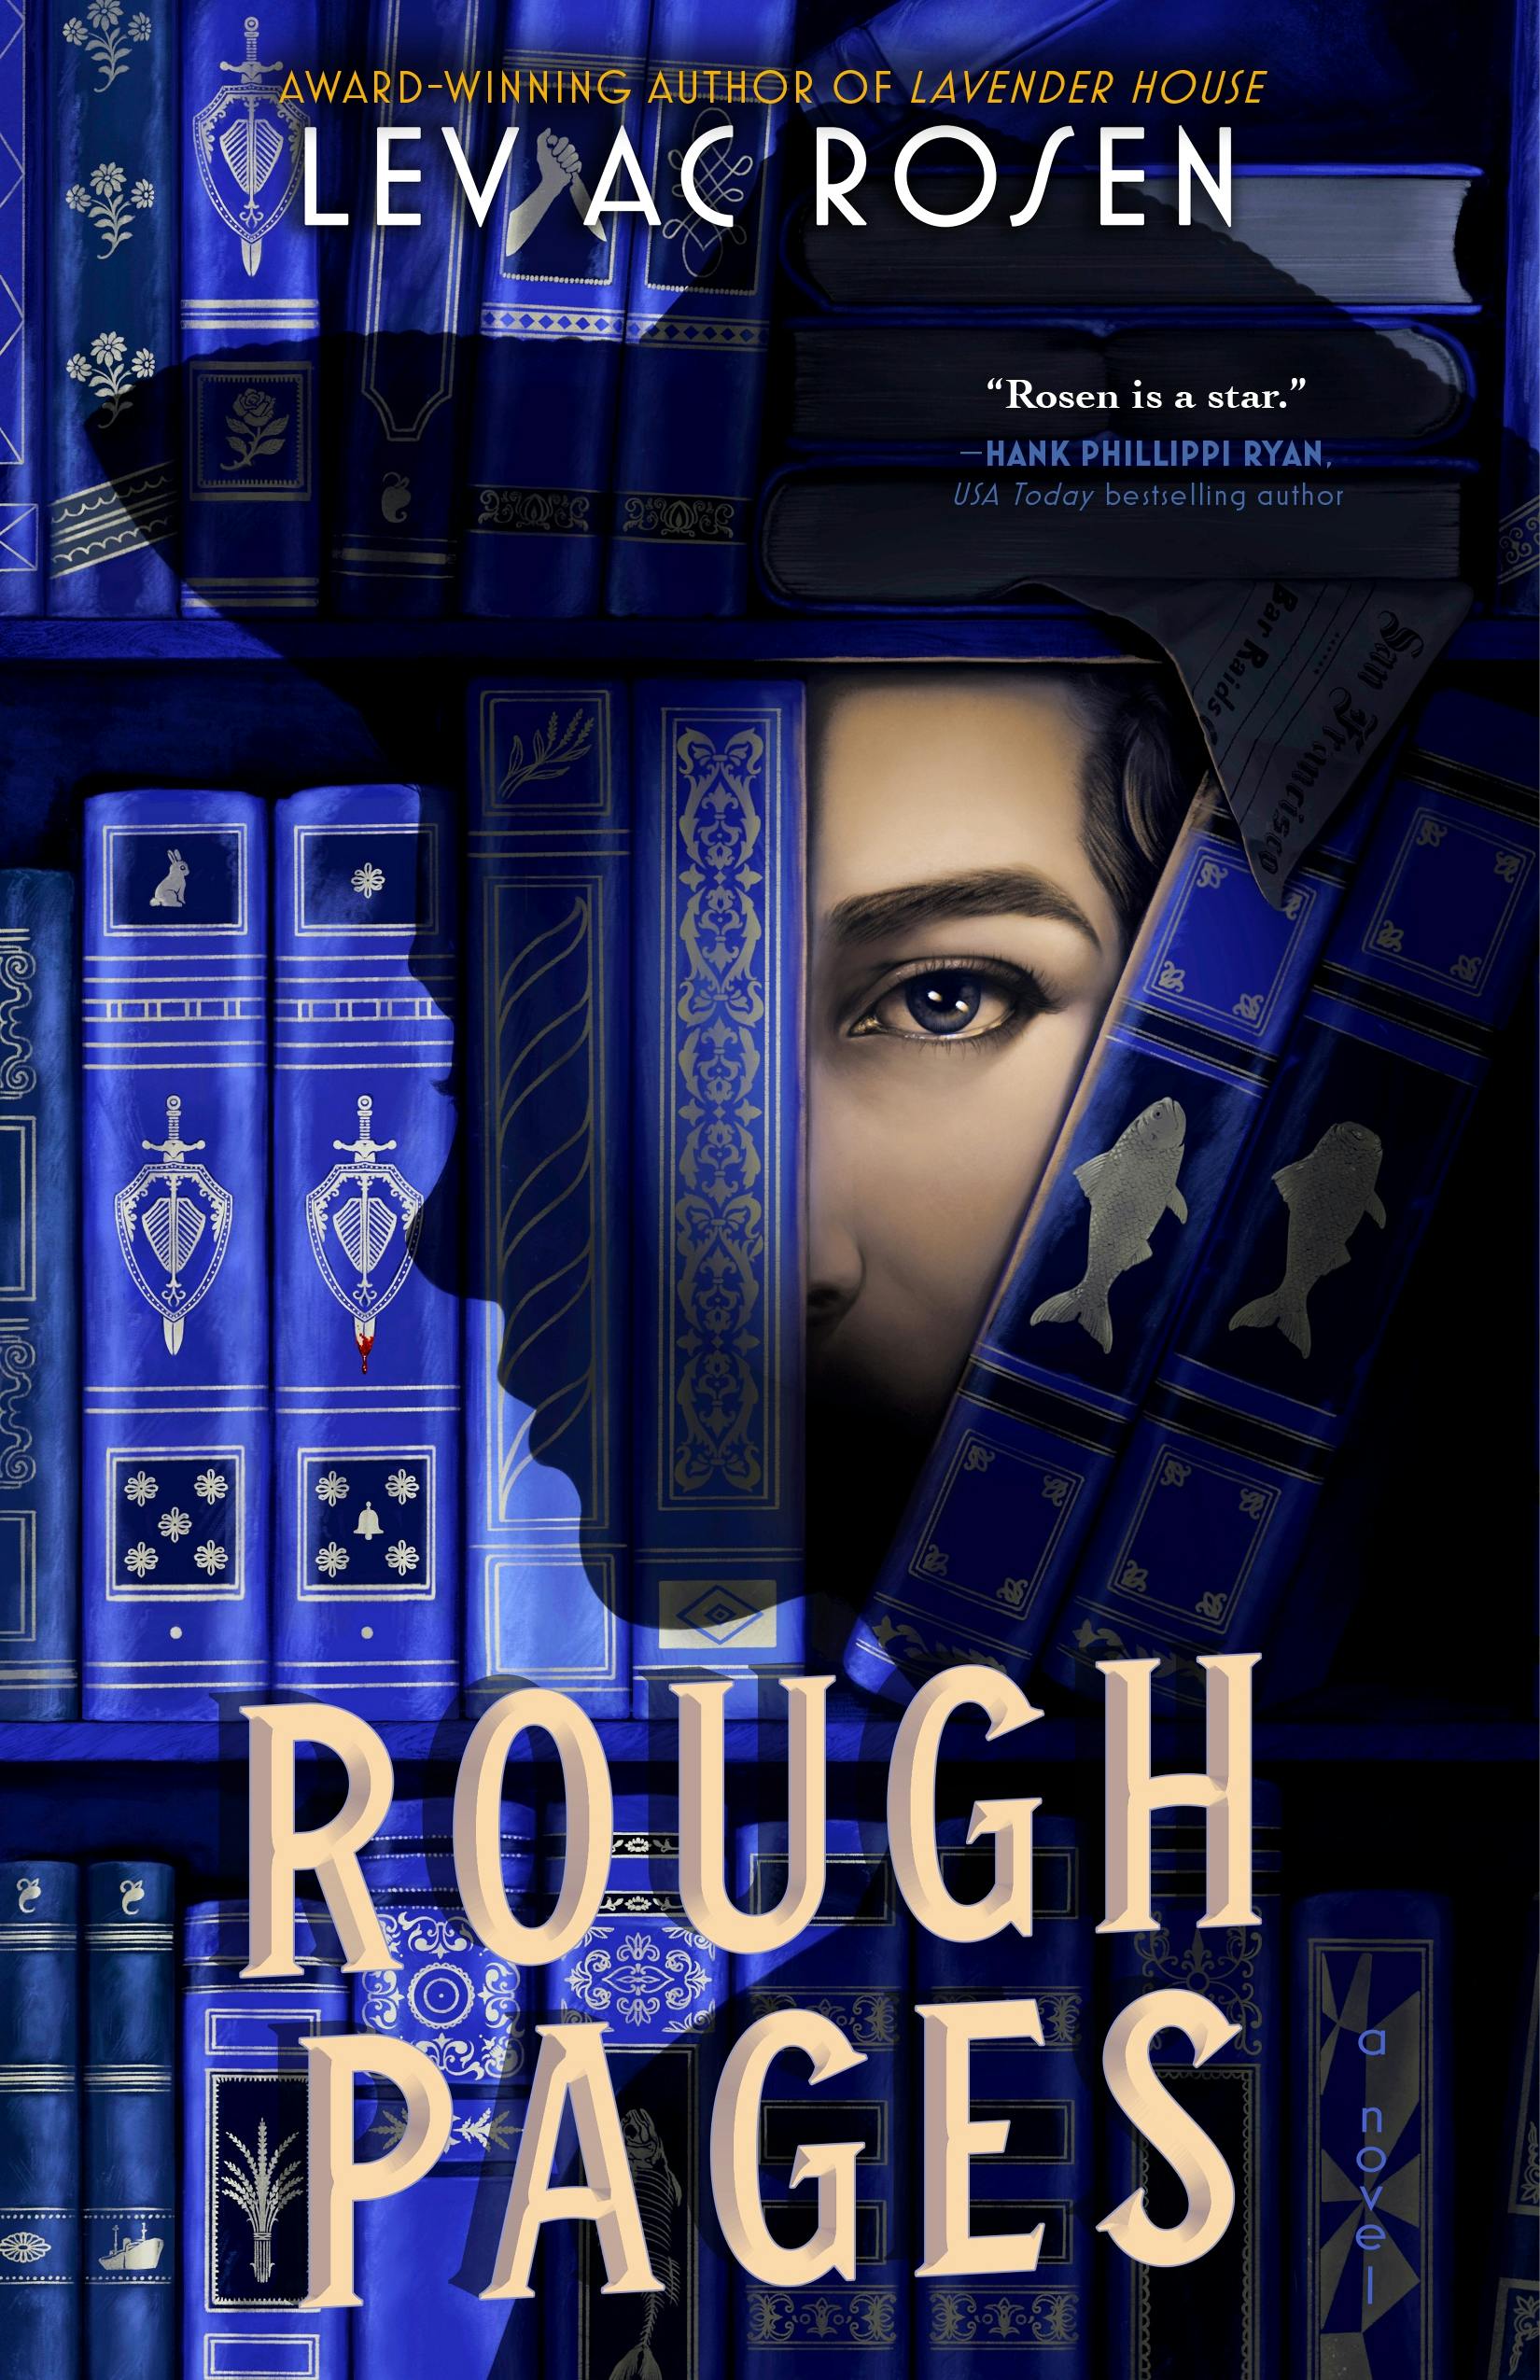 Cover for the book titled as: Rough Pages